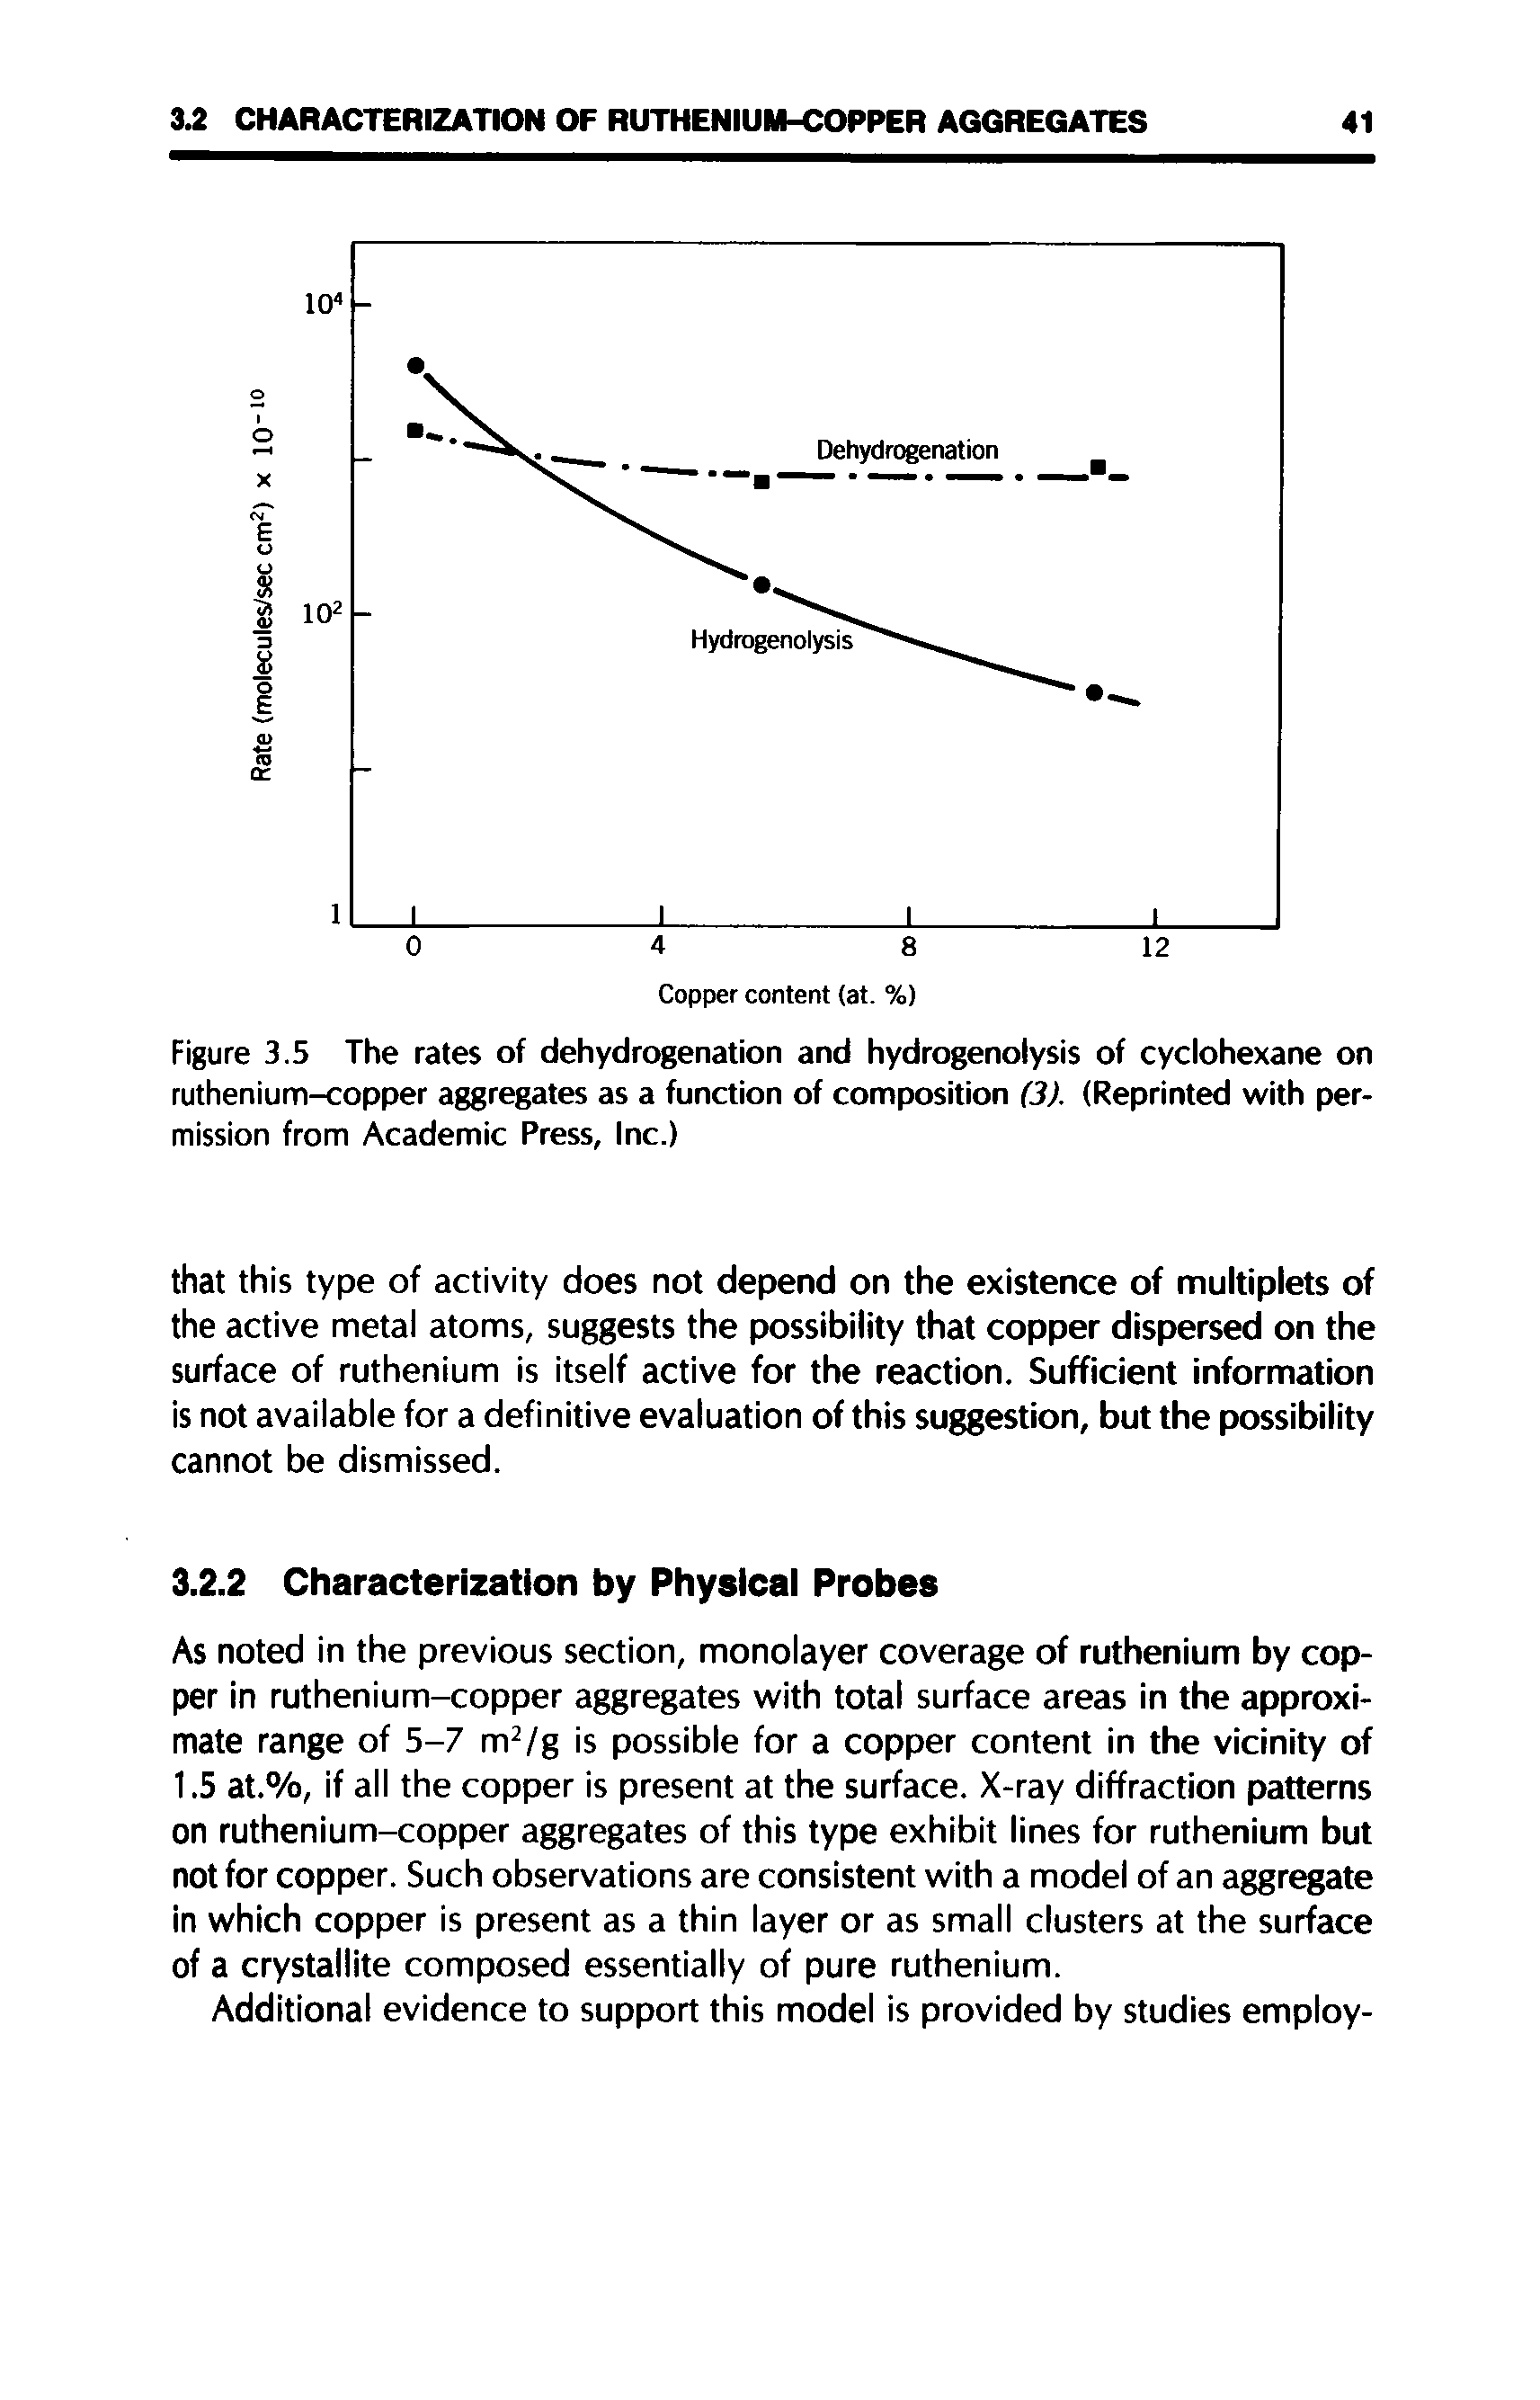 Figure 3.5 The rates of dehydrogenation and hydrogenolysis of cyclohexane on ruthenium-copper aggregates as a function of composition (3). (Reprinted with permission from Academic Press, Inc.)...